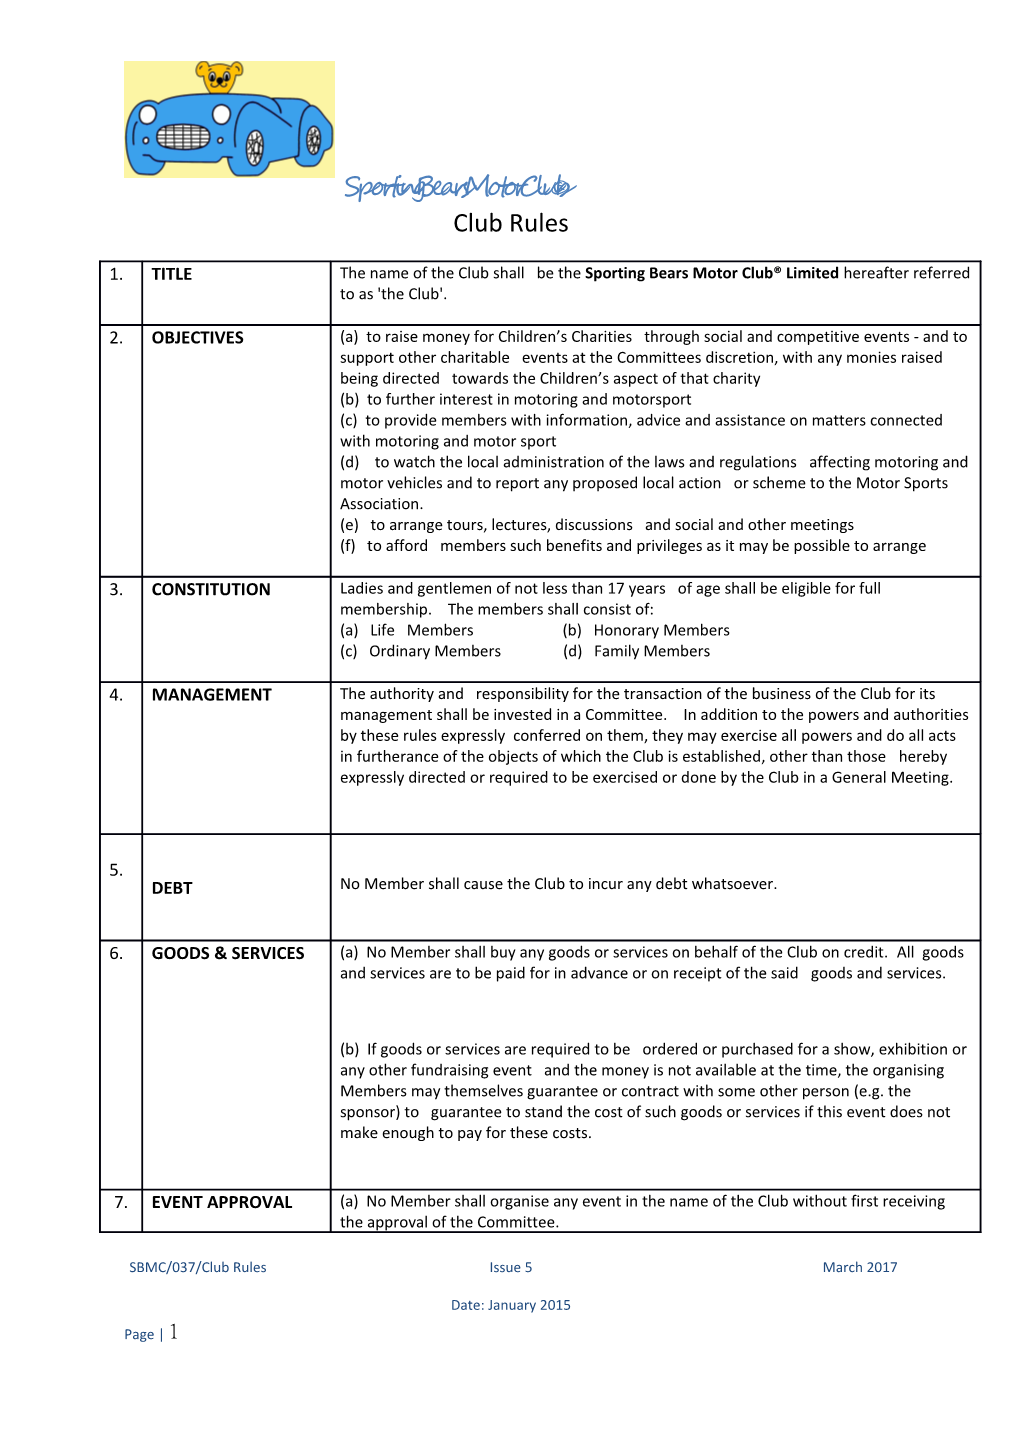 SBMC/037/Club Rules Issue 5March 2017 Date: January 2015